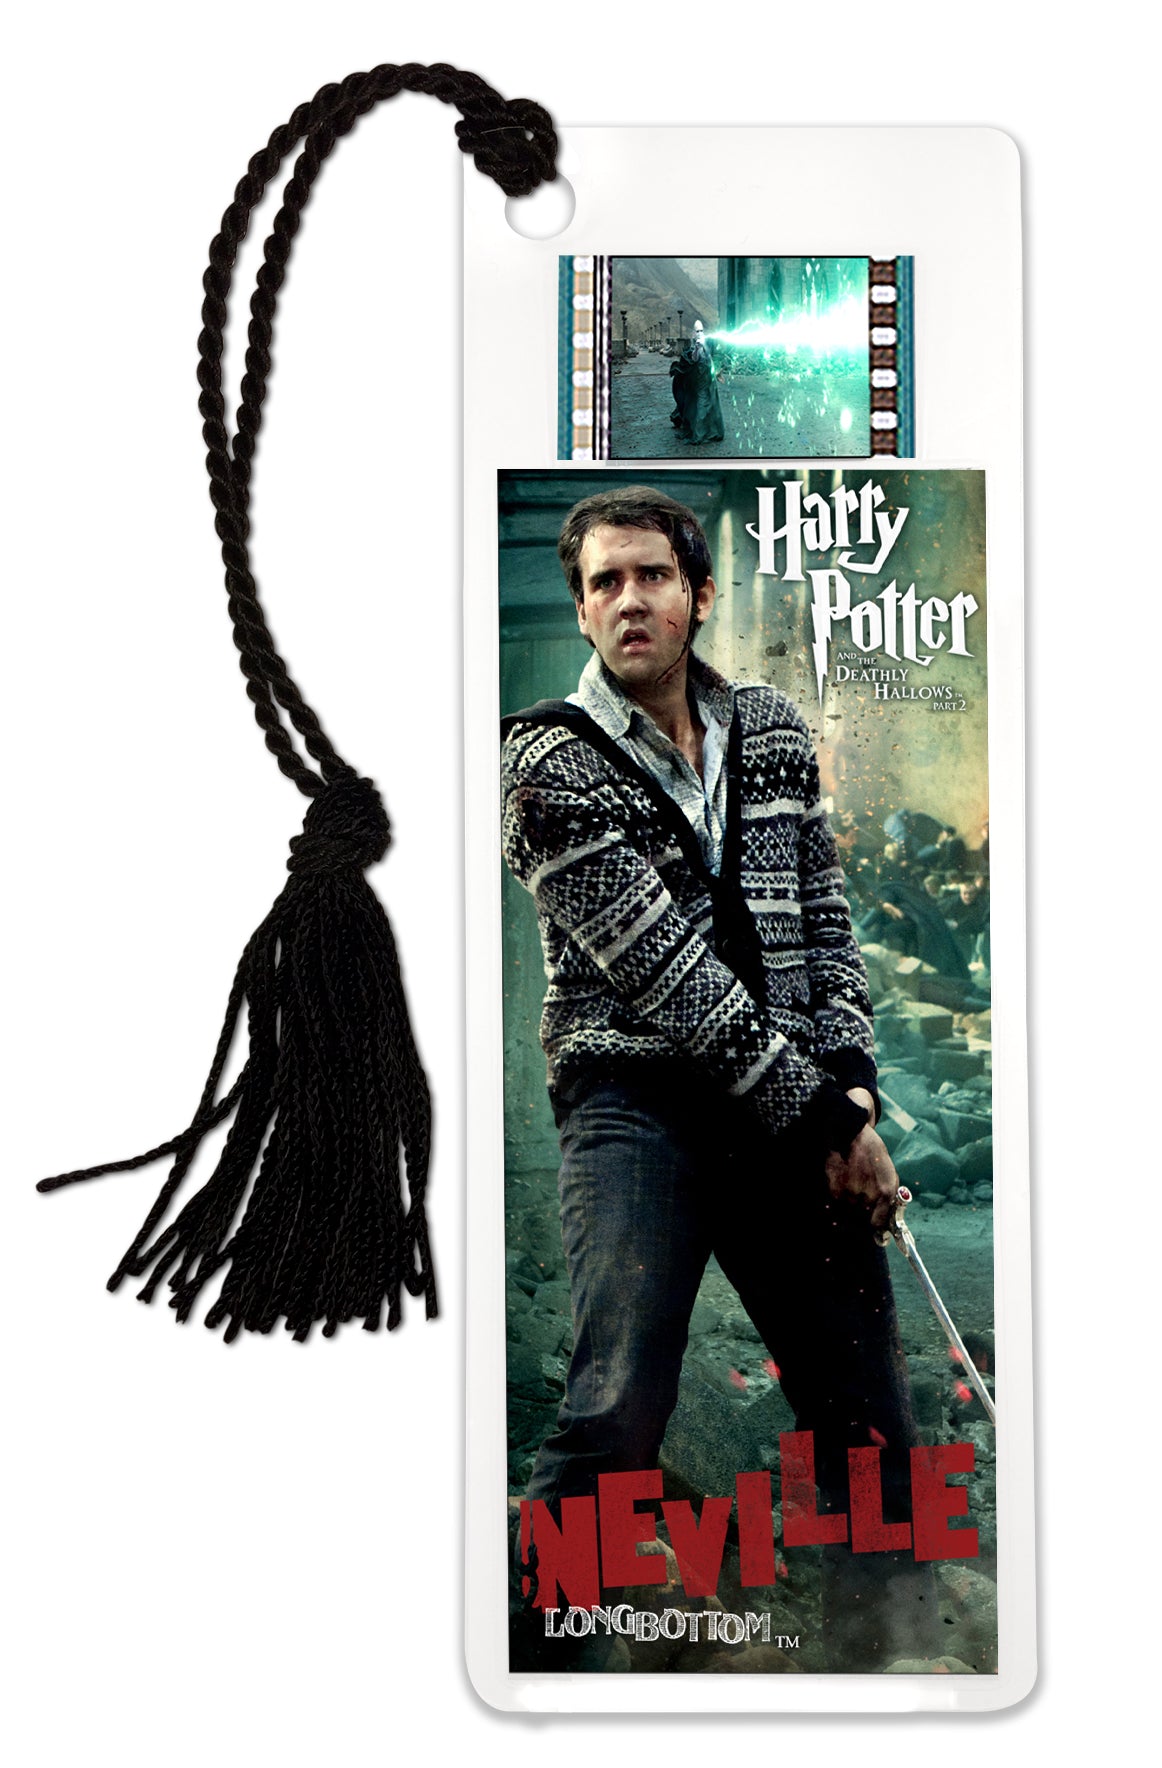 Harry Potter and the Deathly Hallows Part 2 (Neville VS Nagini) FilmCells™ Bookmark USBM620